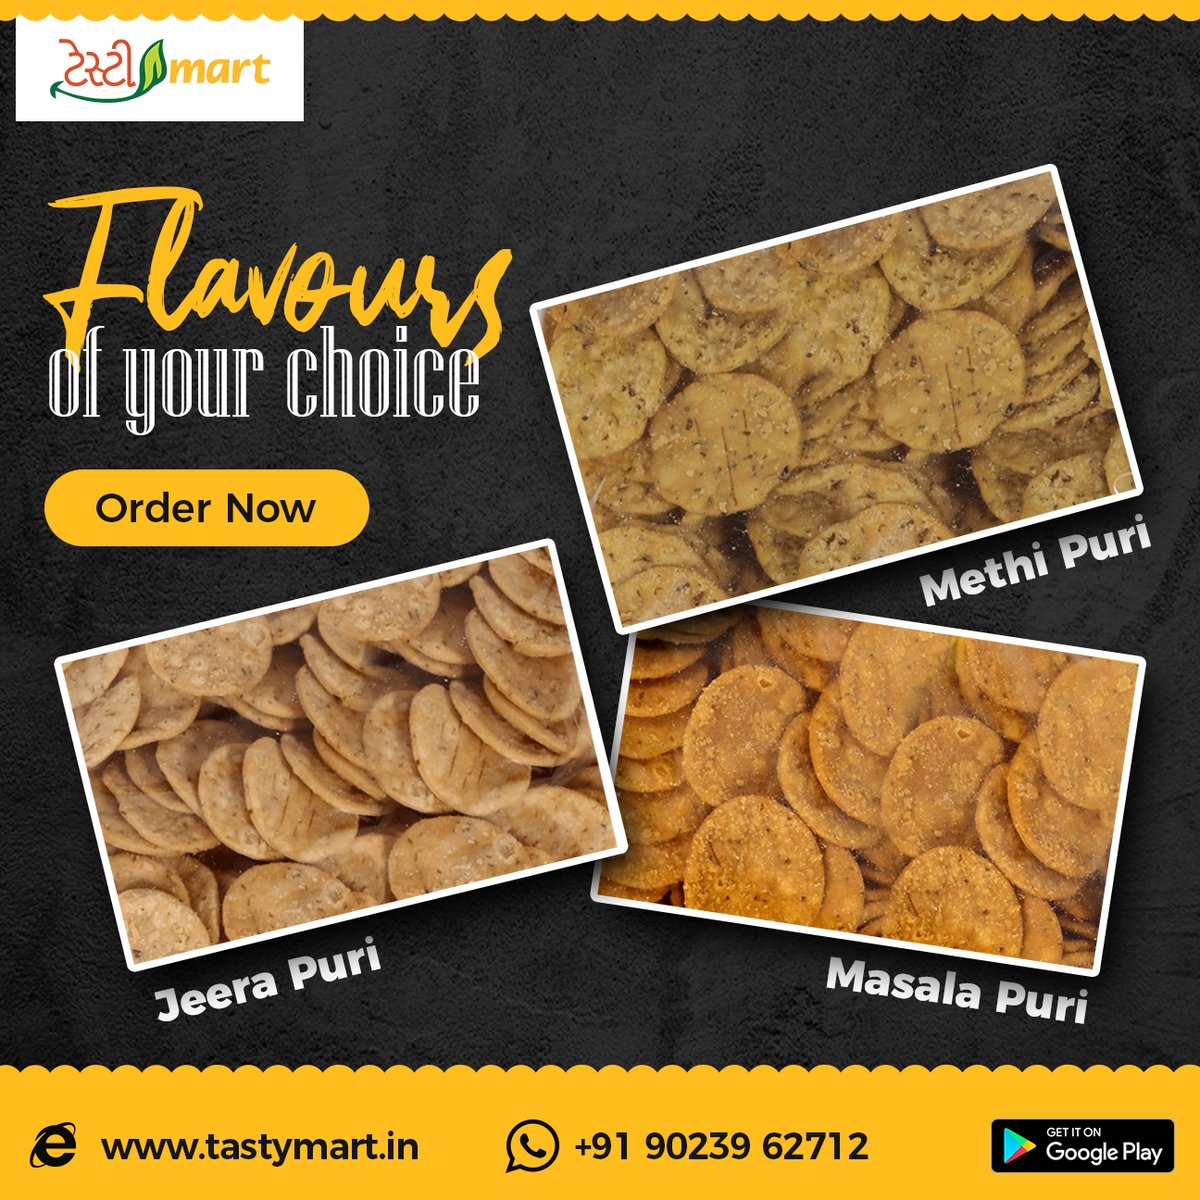 There's no better snack then this 3 flavoured puri which is very famous tea time snack of all Indians. Order now on Tastymart 👇

Website:bit.ly/tastymartweb
.
For offline order (whatsapp): bit.ly/30T1aCS

#teatime #farsan #namkeen #gujaratinasto #tastymart_food